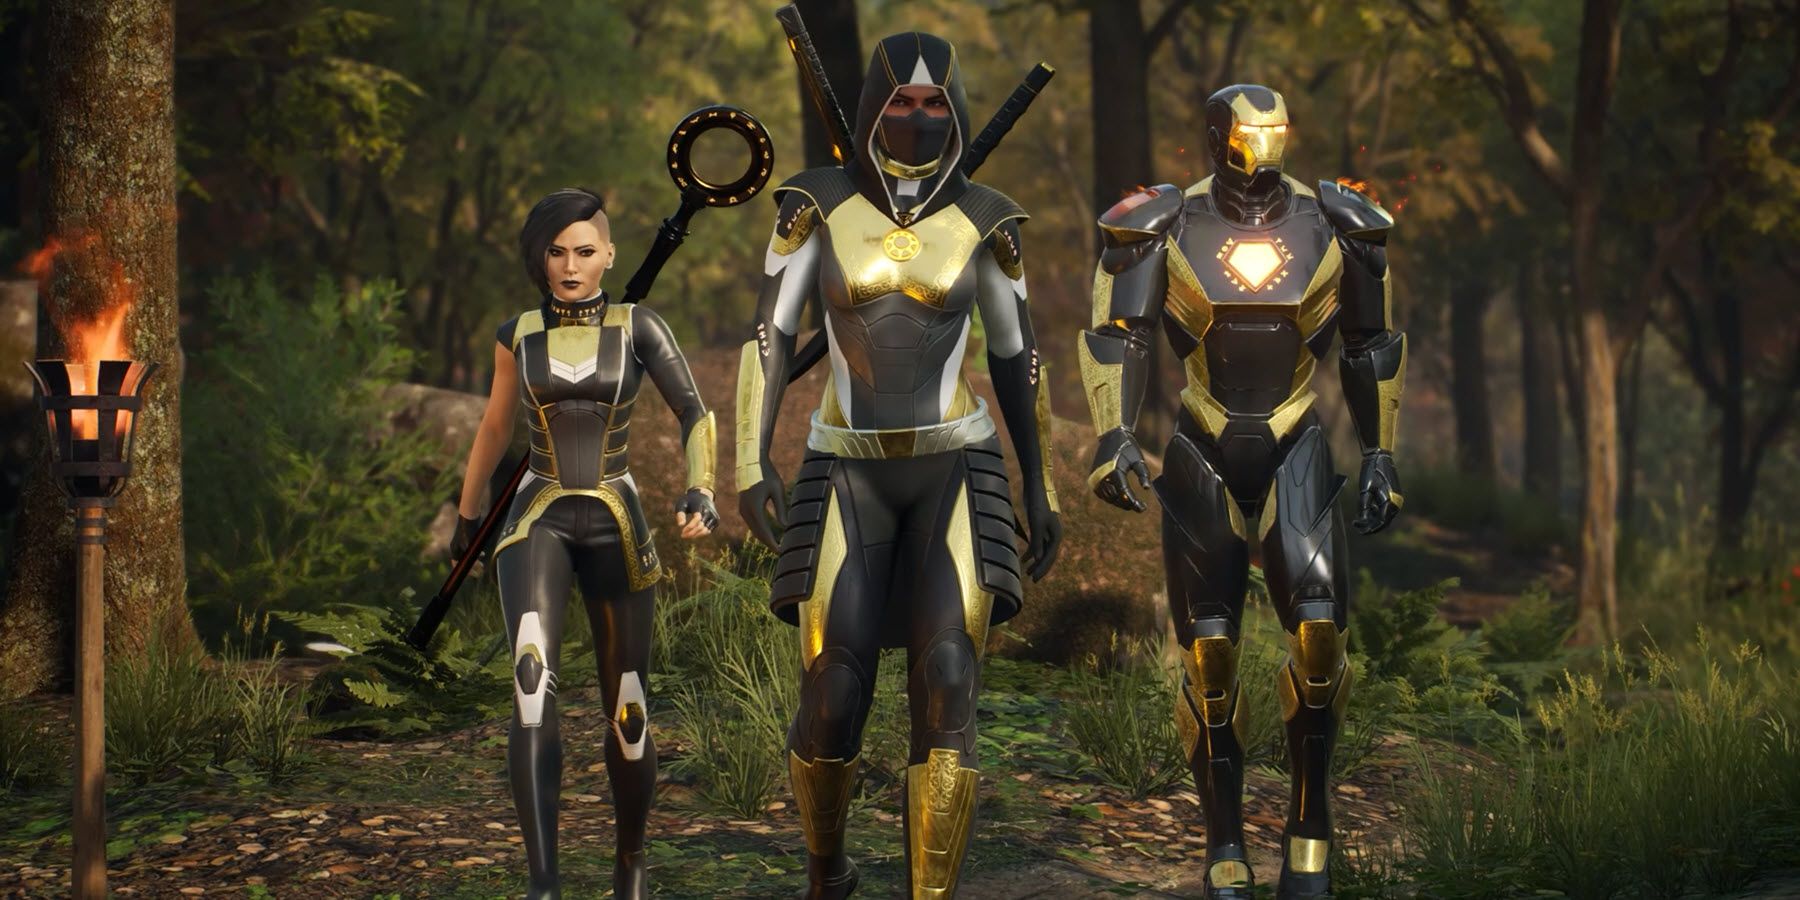 Marvel's Midnight Suns isn't supported on Steam Deck, says 2K